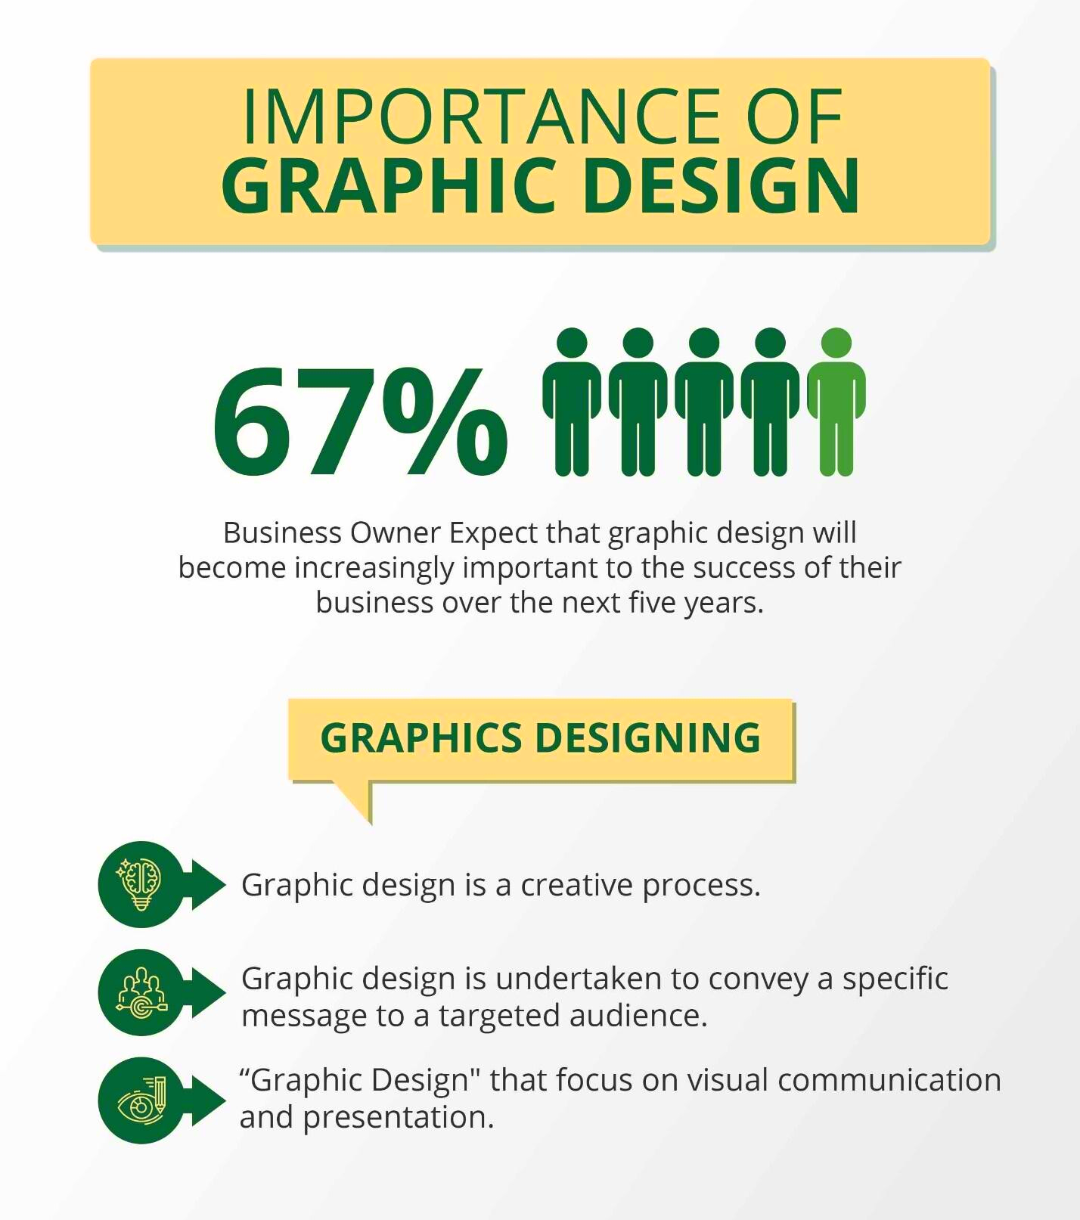 Importance of Graphic Design